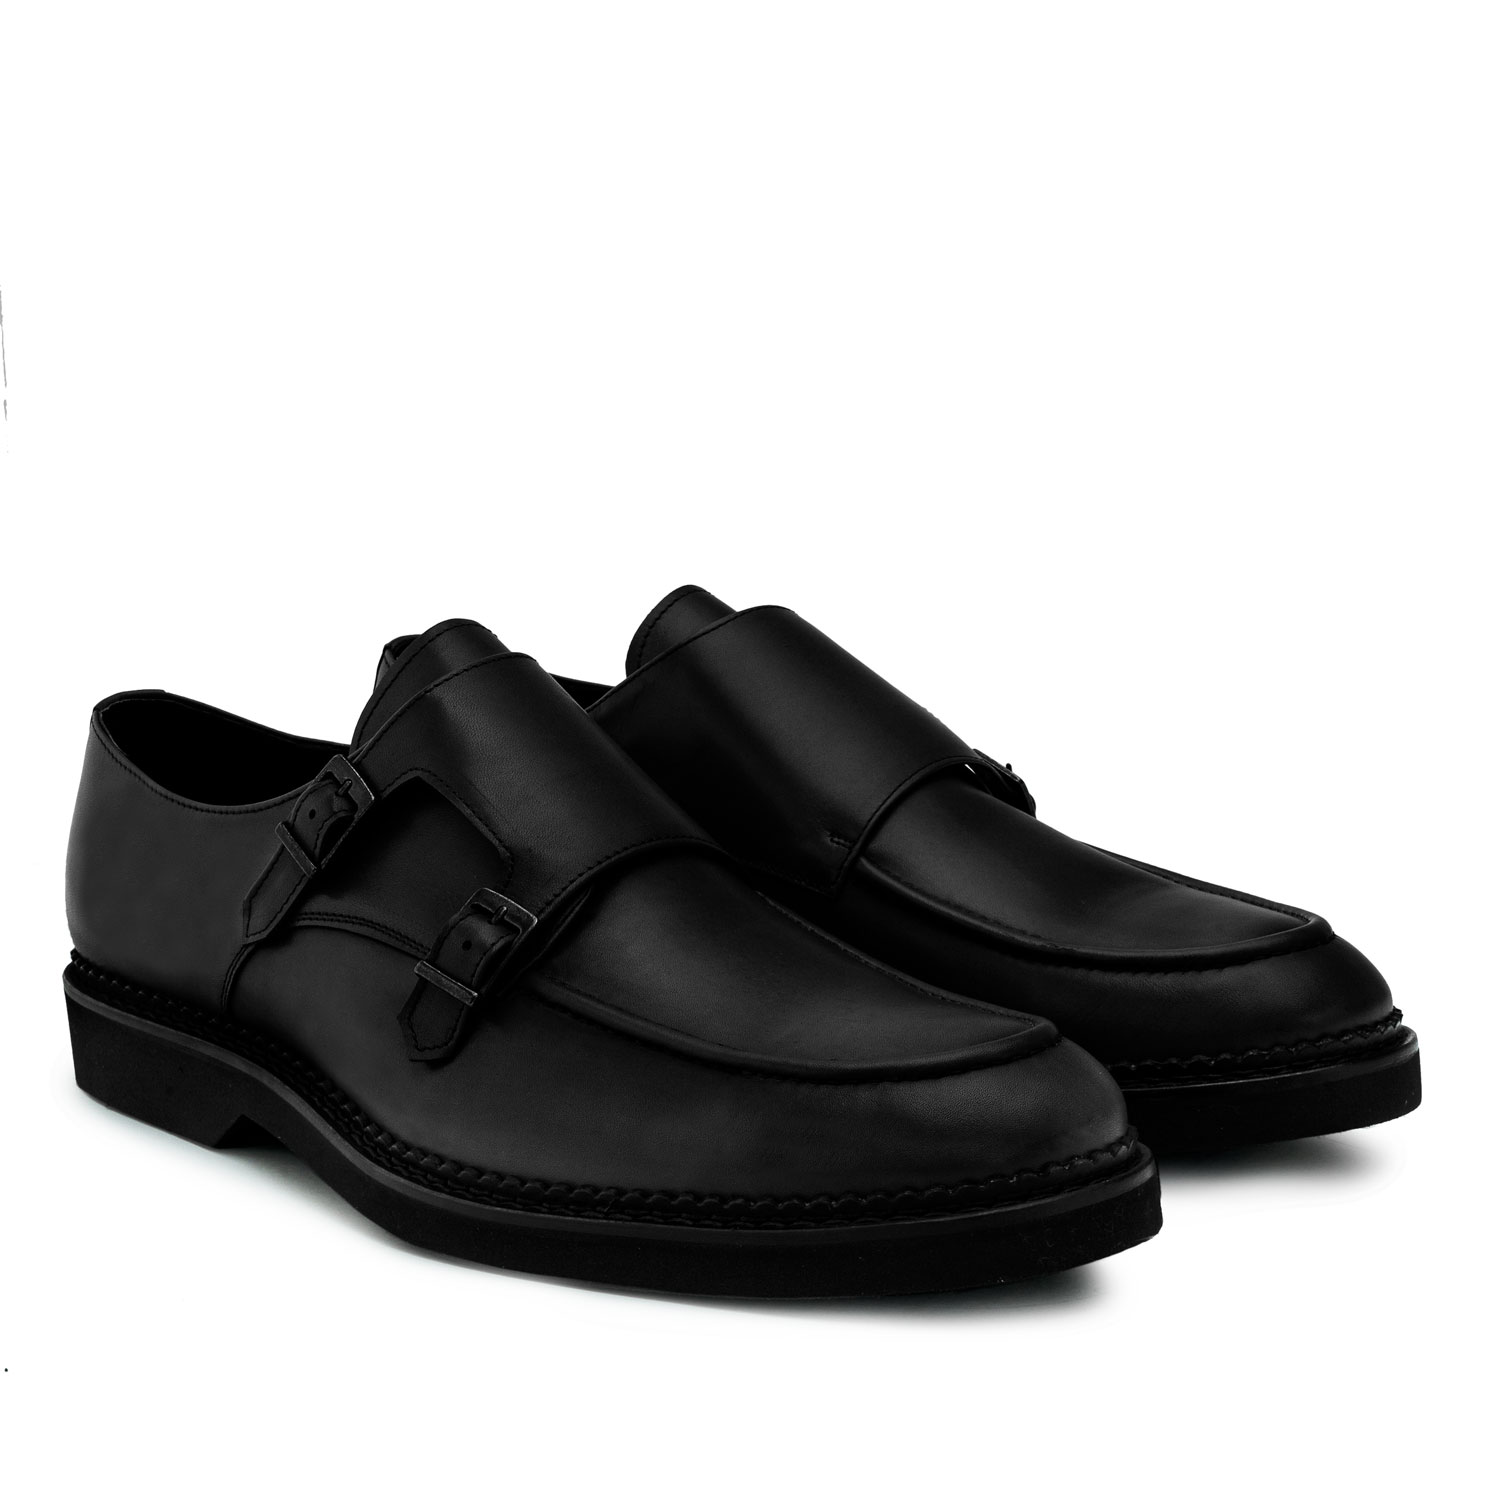 Monkstrap Shoes in Black Leather 